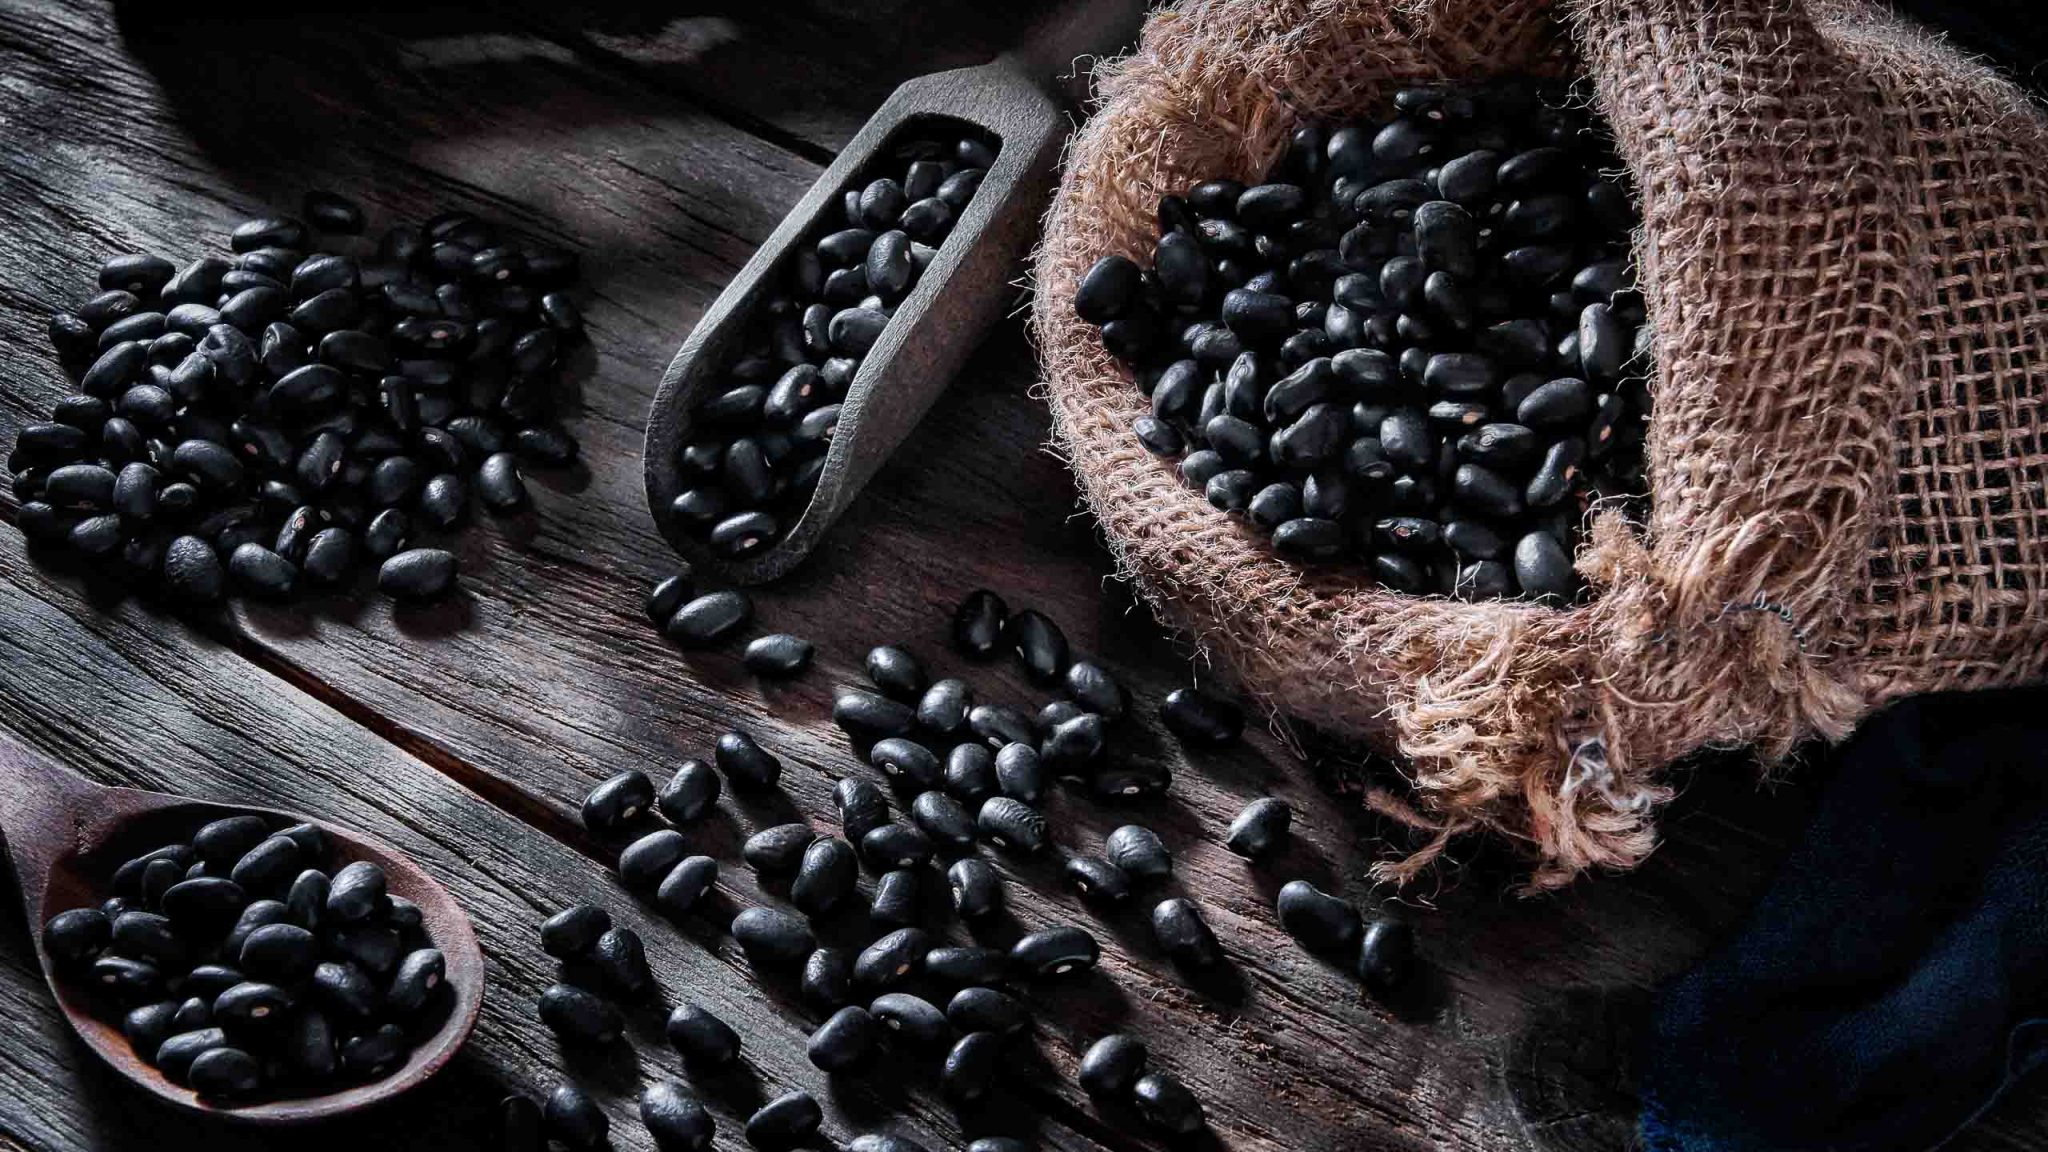 Food photography - Black beans